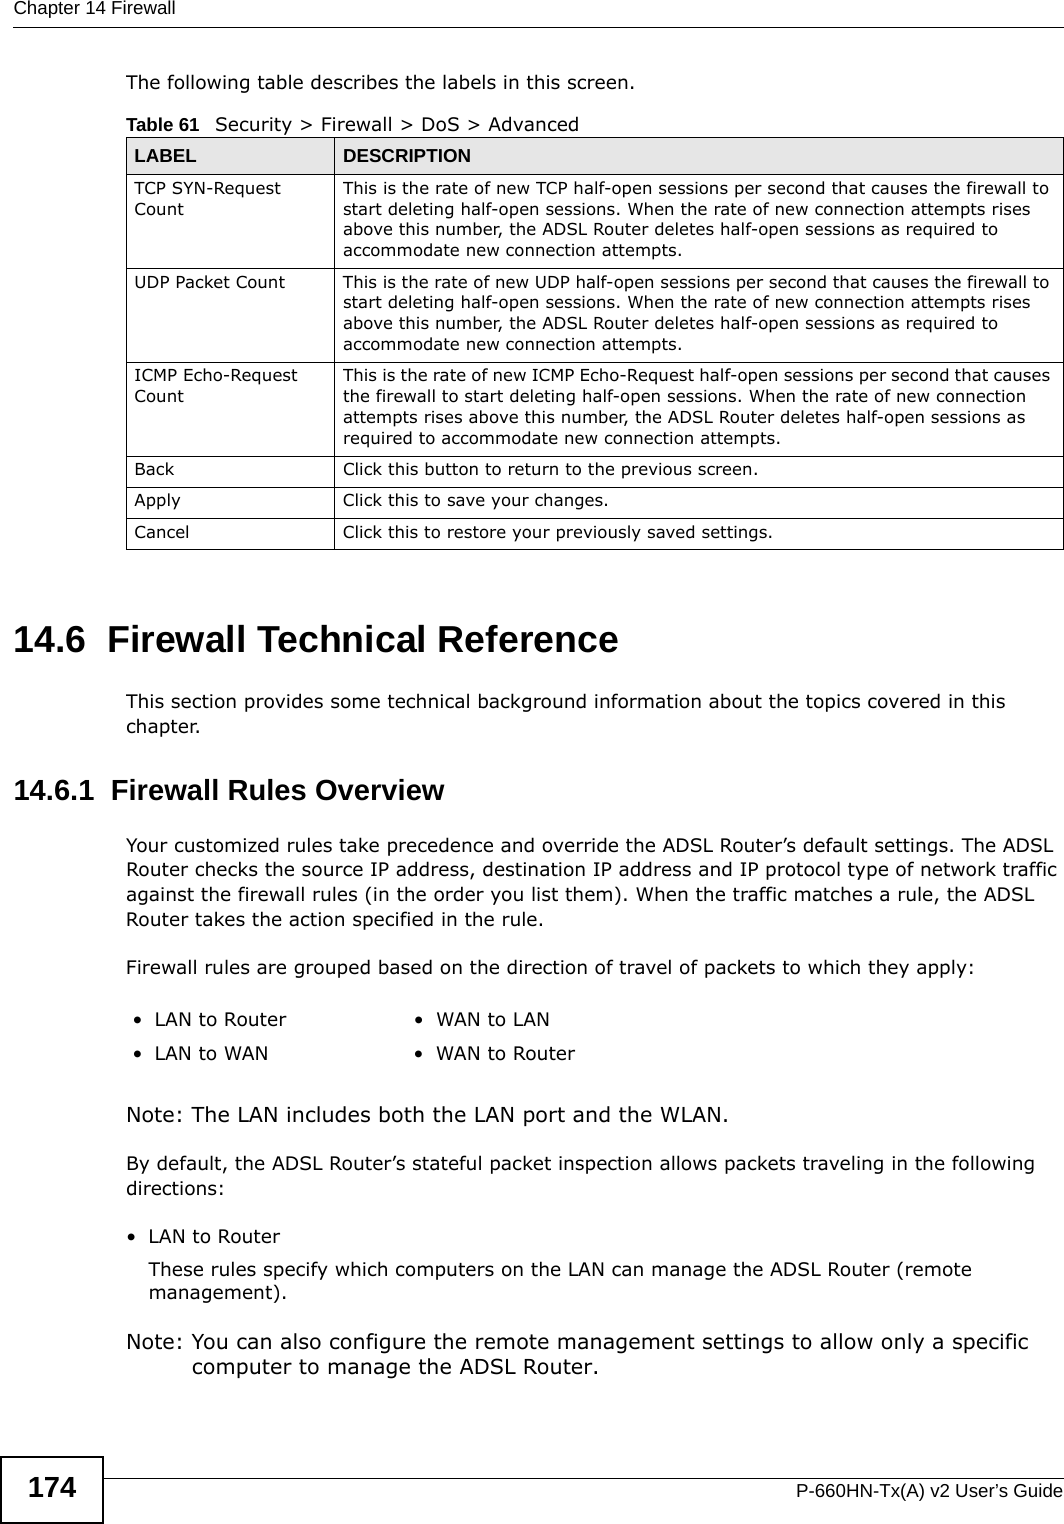 Chapter 14 FirewallP-660HN-Tx(A) v2 User’s Guide174The following table describes the labels in this screen.14.6  Firewall Technical ReferenceThis section provides some technical background information about the topics covered in this chapter.14.6.1  Firewall Rules OverviewYour customized rules take precedence and override the ADSL Router’s default settings. The ADSL Router checks the source IP address, destination IP address and IP protocol type of network traffic against the firewall rules (in the order you list them). When the traffic matches a rule, the ADSL Router takes the action specified in the rule. Firewall rules are grouped based on the direction of travel of packets to which they apply: Note: The LAN includes both the LAN port and the WLAN.By default, the ADSL Router’s stateful packet inspection allows packets traveling in the following directions:•LAN to Router These rules specify which computers on the LAN can manage the ADSL Router (remote management). Note: You can also configure the remote management settings to allow only a specific computer to manage the ADSL Router.Table 61   Security &gt; Firewall &gt; DoS &gt; AdvancedLABEL DESCRIPTIONTCP SYN-Request CountThis is the rate of new TCP half-open sessions per second that causes the firewall to start deleting half-open sessions. When the rate of new connection attempts rises above this number, the ADSL Router deletes half-open sessions as required to accommodate new connection attempts.UDP Packet Count This is the rate of new UDP half-open sessions per second that causes the firewall to start deleting half-open sessions. When the rate of new connection attempts rises above this number, the ADSL Router deletes half-open sessions as required to accommodate new connection attempts.ICMP Echo-Request CountThis is the rate of new ICMP Echo-Request half-open sessions per second that causes the firewall to start deleting half-open sessions. When the rate of new connection attempts rises above this number, the ADSL Router deletes half-open sessions as required to accommodate new connection attempts.Back Click this button to return to the previous screen.Apply Click this to save your changes.Cancel Click this to restore your previously saved settings.•LAN to Router •WAN to LAN• LAN to WAN • WAN to Router